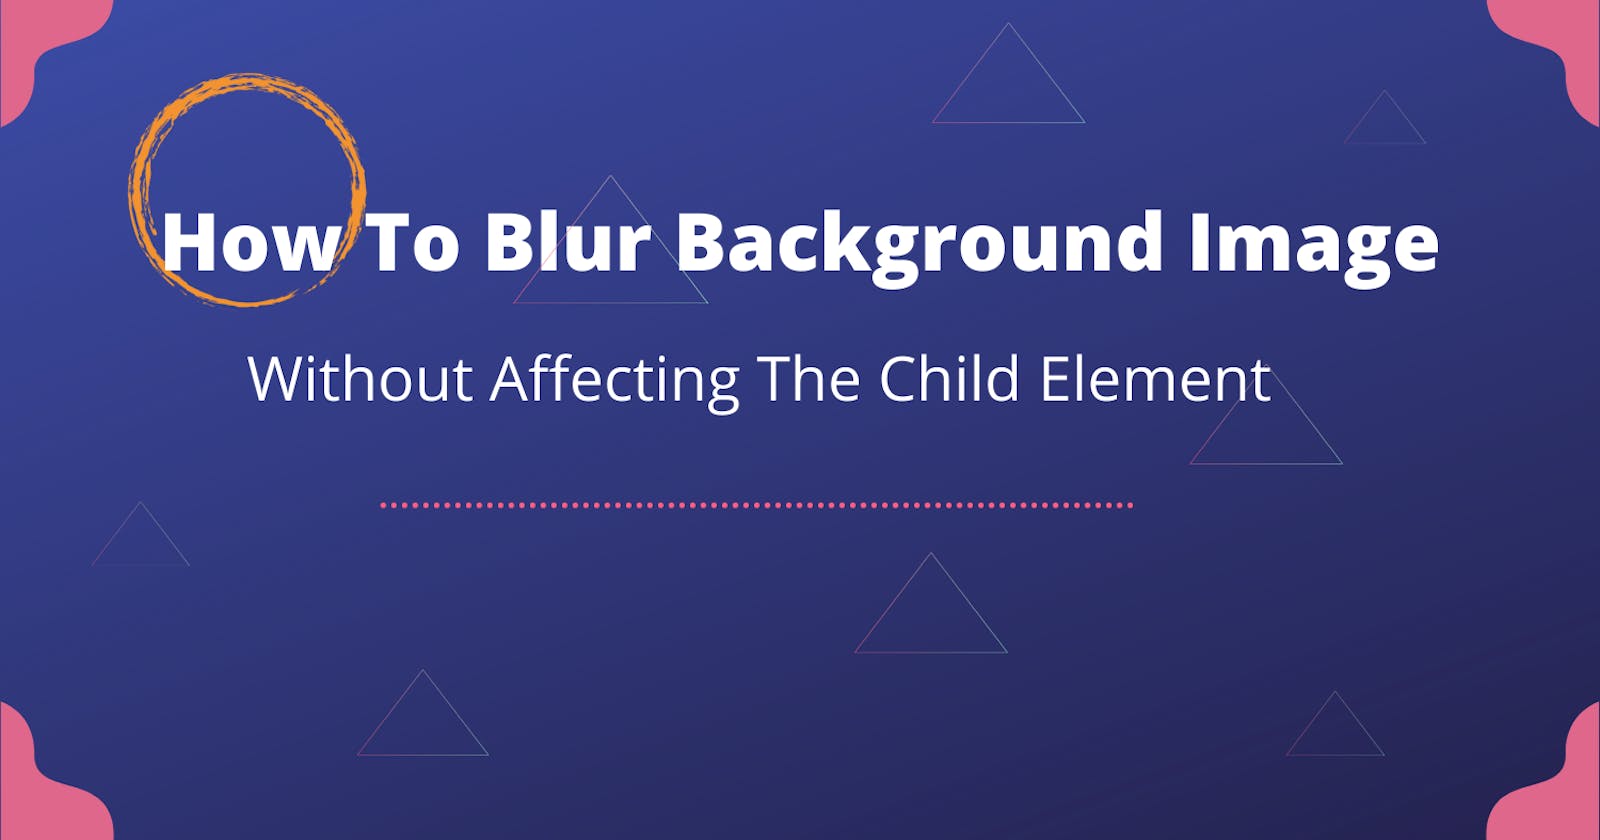 How To Blur Background Image Without Affecting The Child Element